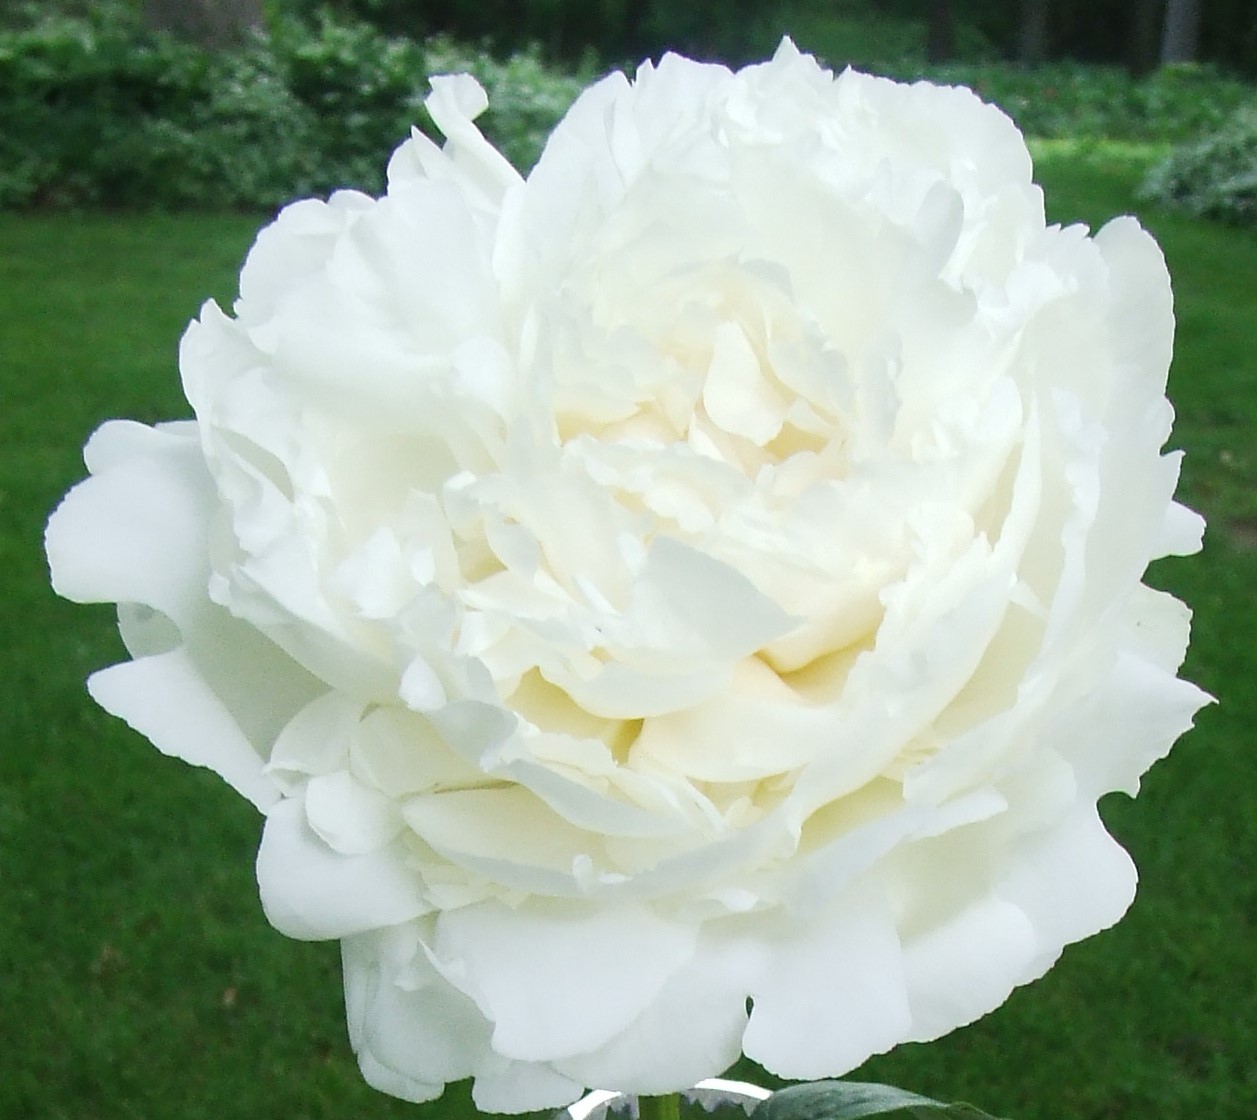 A pure white flower is often the depiction of virginity. I chose a peony because it's one of my favourite flowers, and it's symbolic in a way - ants have to eat away the exterior waxy coat before the flower can bloom. Image from www.bridgewatergardens.com